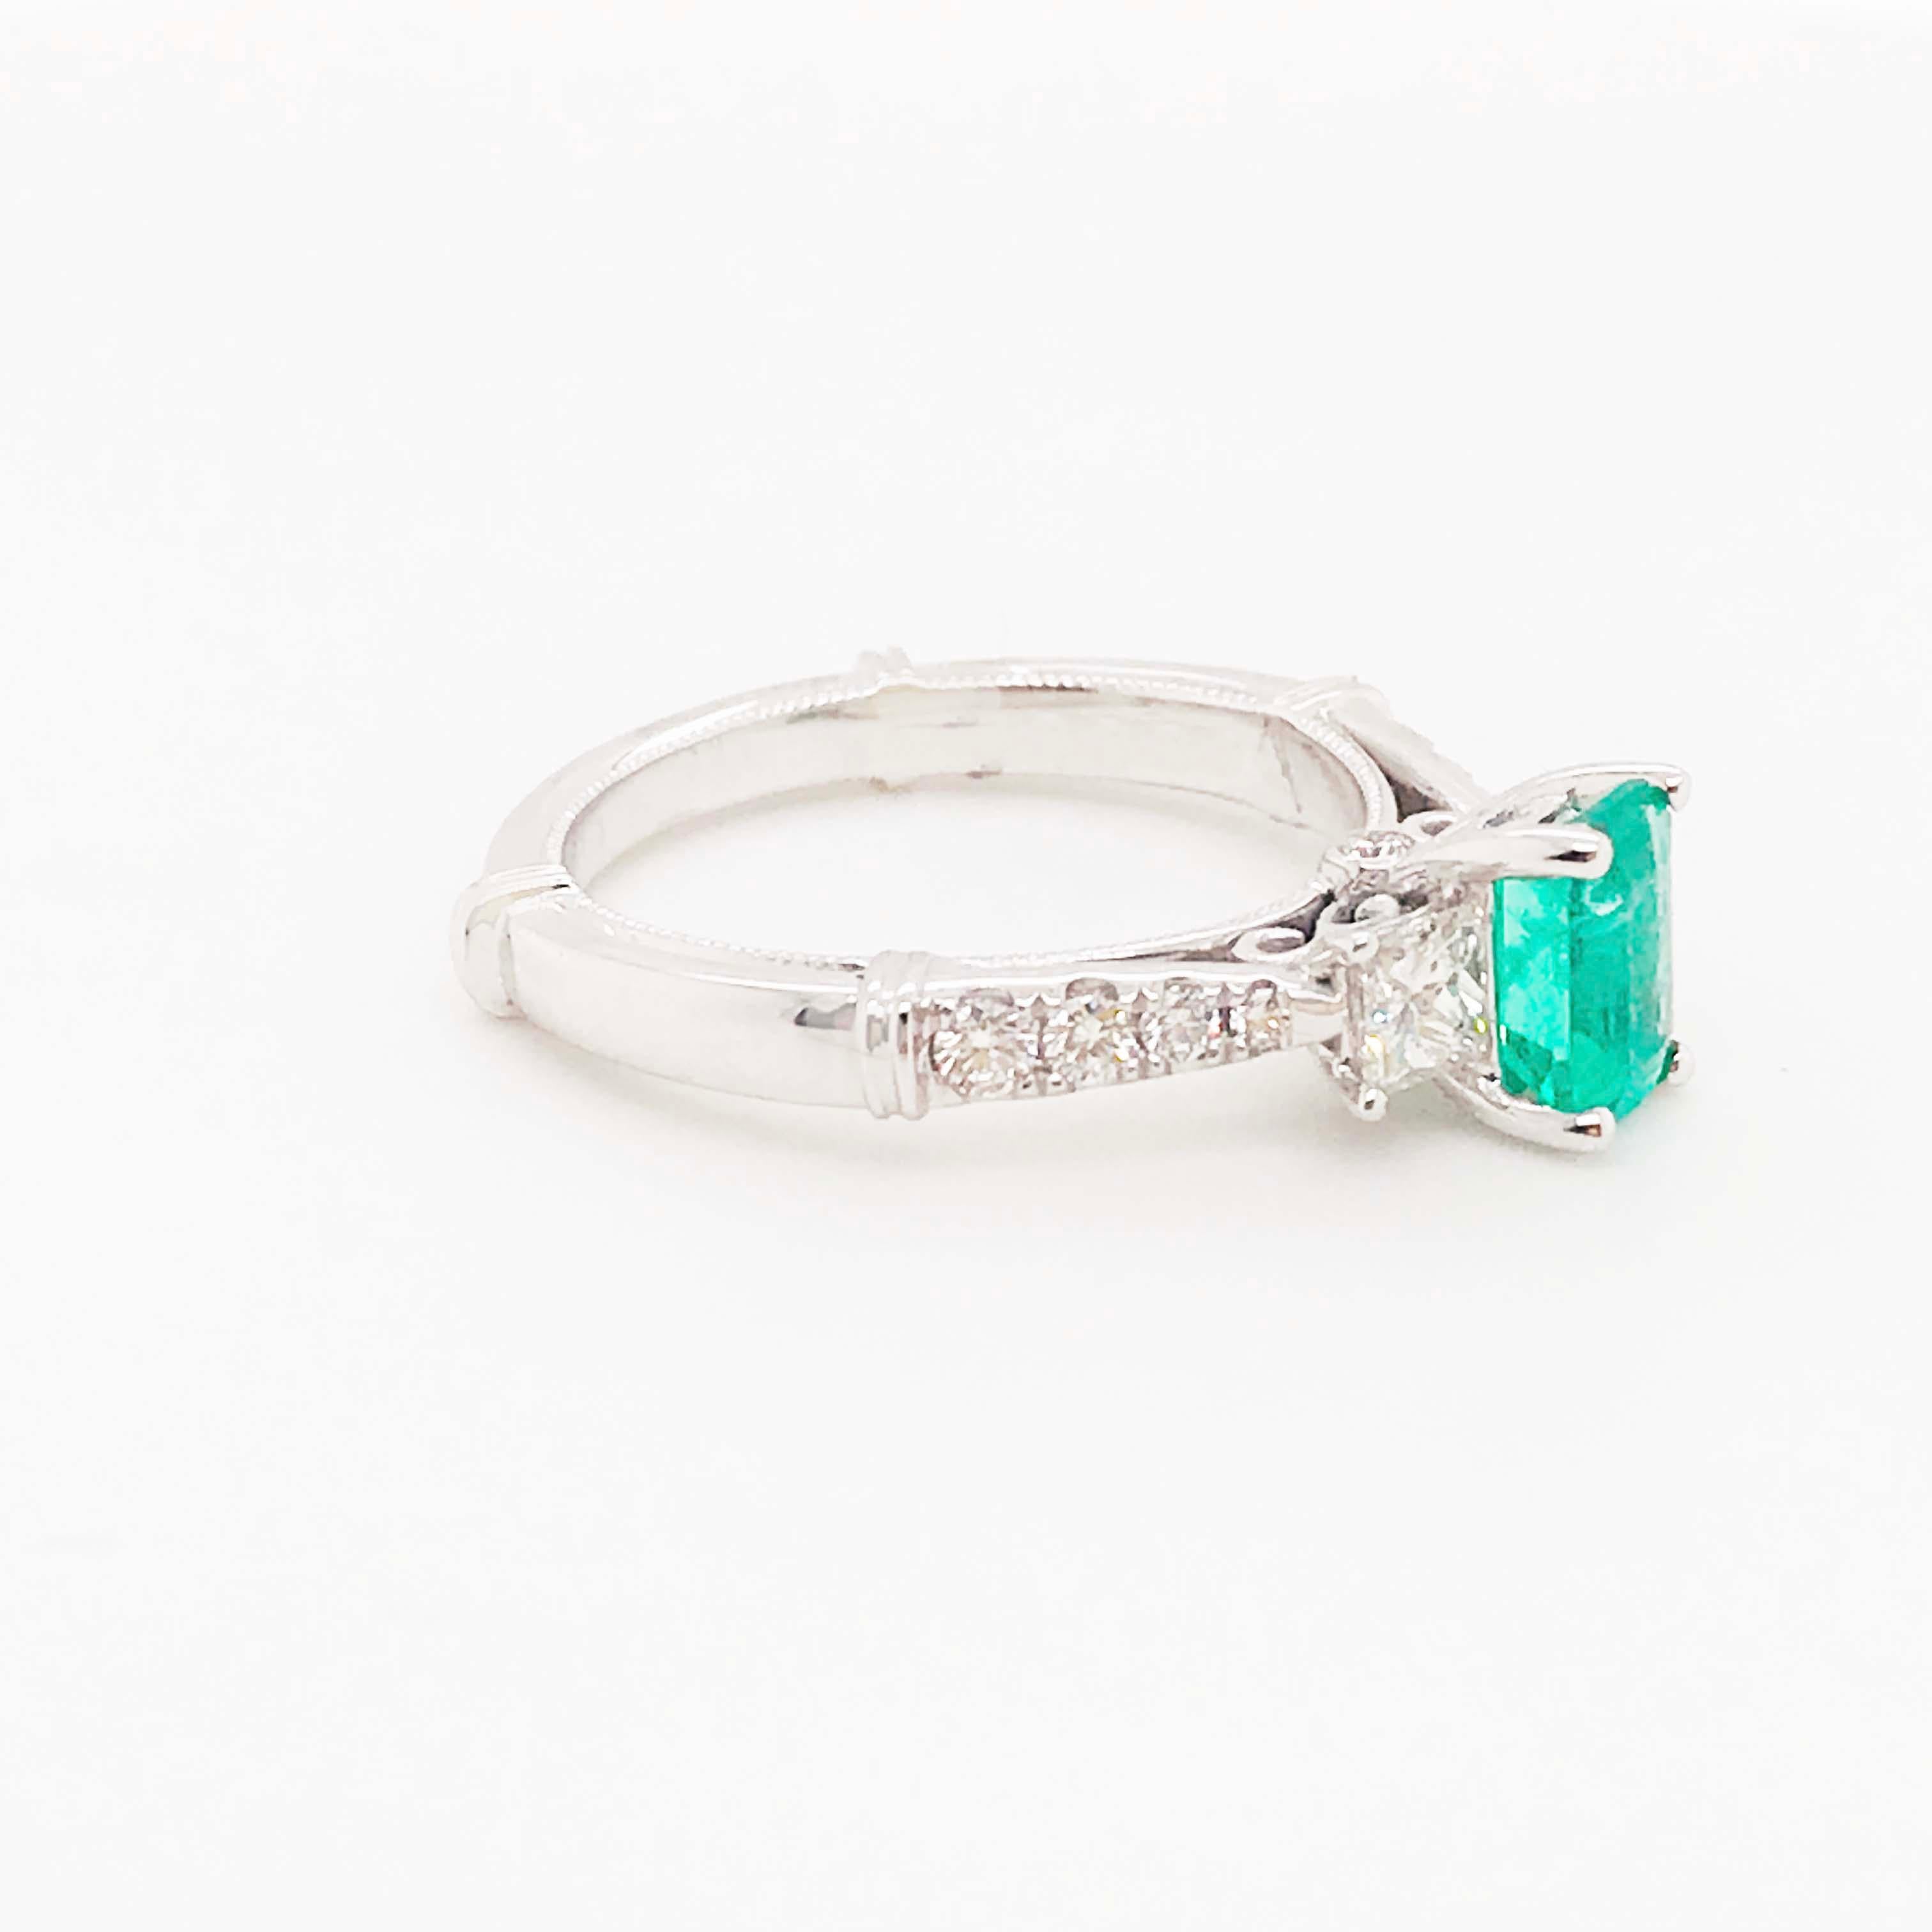 Natural Colombian Emerald and Diamond Engagement Ring set in 18 Karat White Gold
The genuine emerald gemstone is known as the 